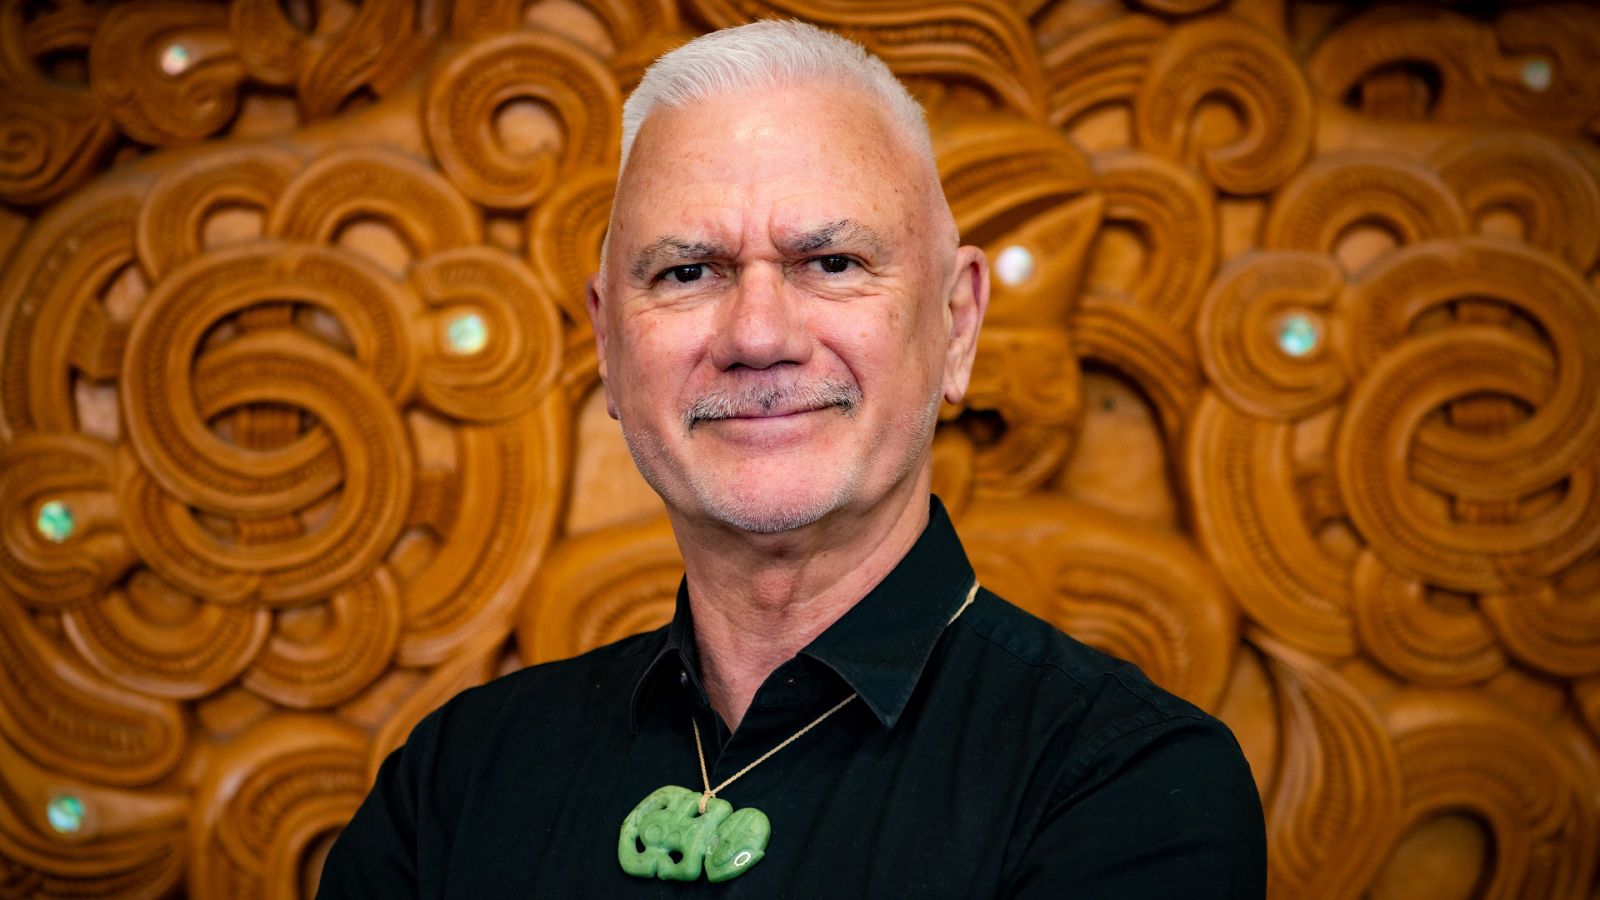 Man with Pounamu greenstone pendant stands against wooden Maori artwork backdrop, showcasing cultural adornment and traditional art.